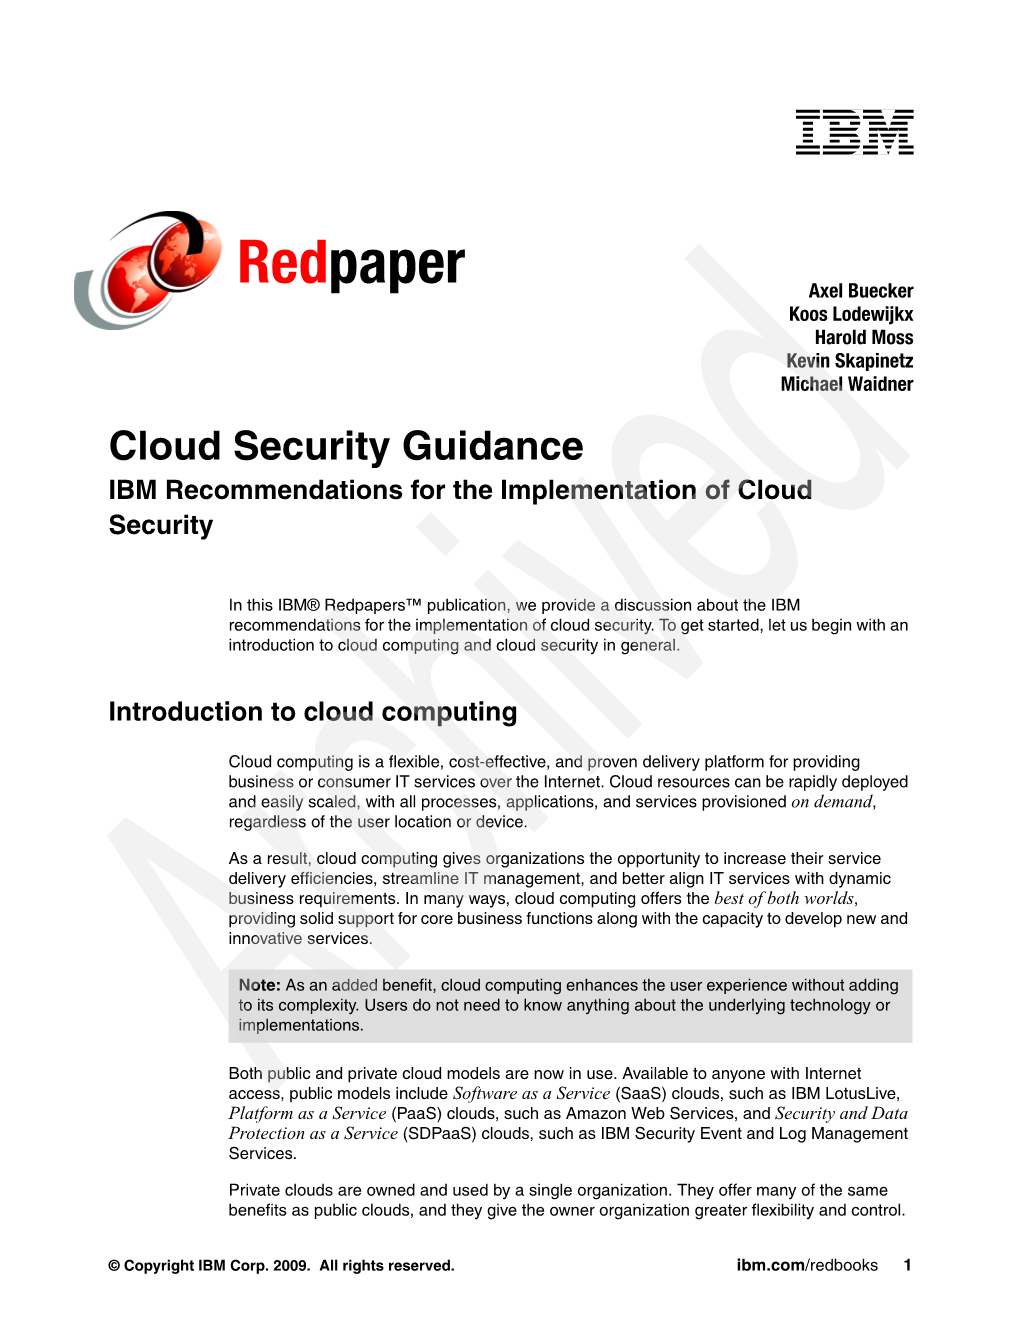 Cloud Security Guidance IBM Recommendations for the Implementation of Cloud Security